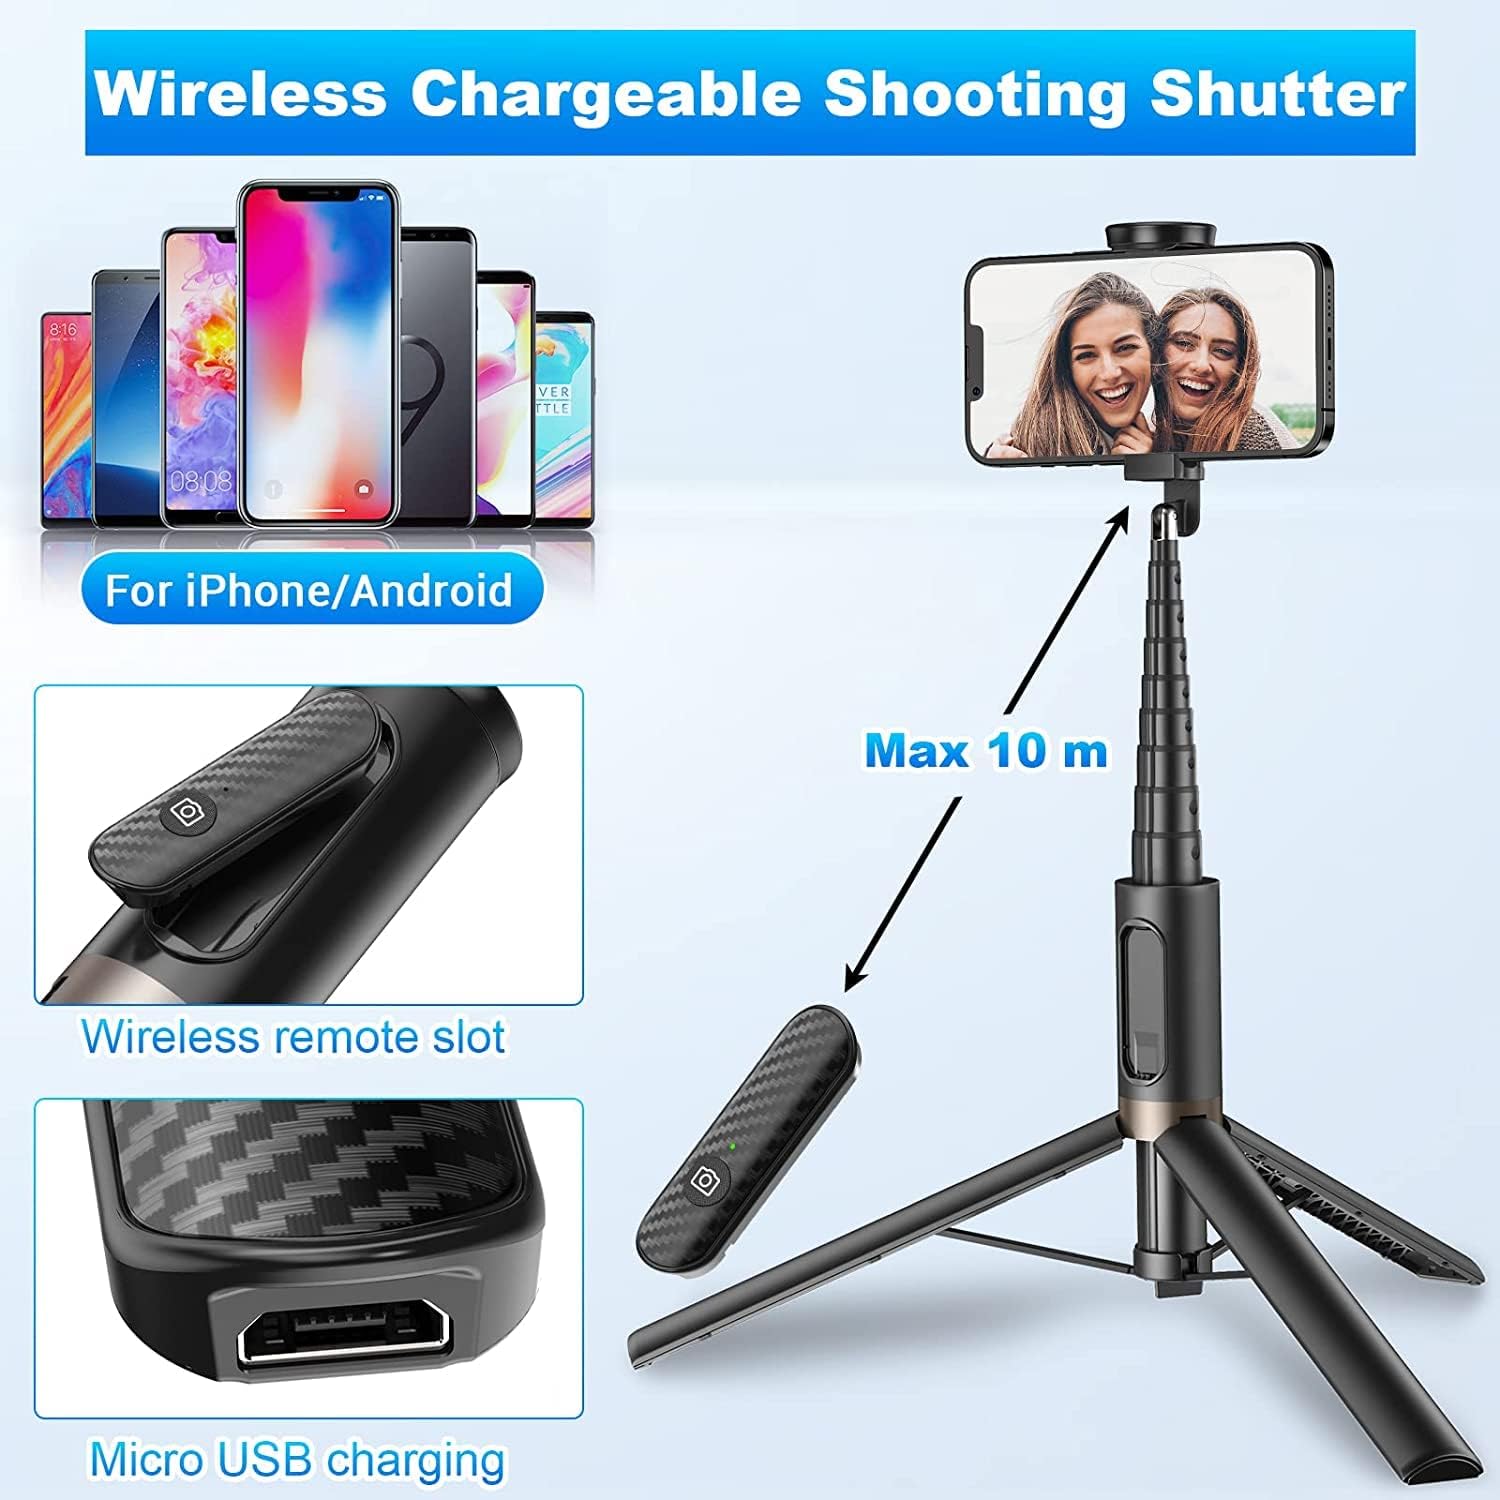 TONEOF 152CM Cell Phone Selfie Stick Tripod,Smartphone Tripod Stand All-in-1 with Integrated Wireless Remote,Portable,Lightweight,Extendable Phone Tripod for 4''-7'' iPhone and Android Phones(Black)